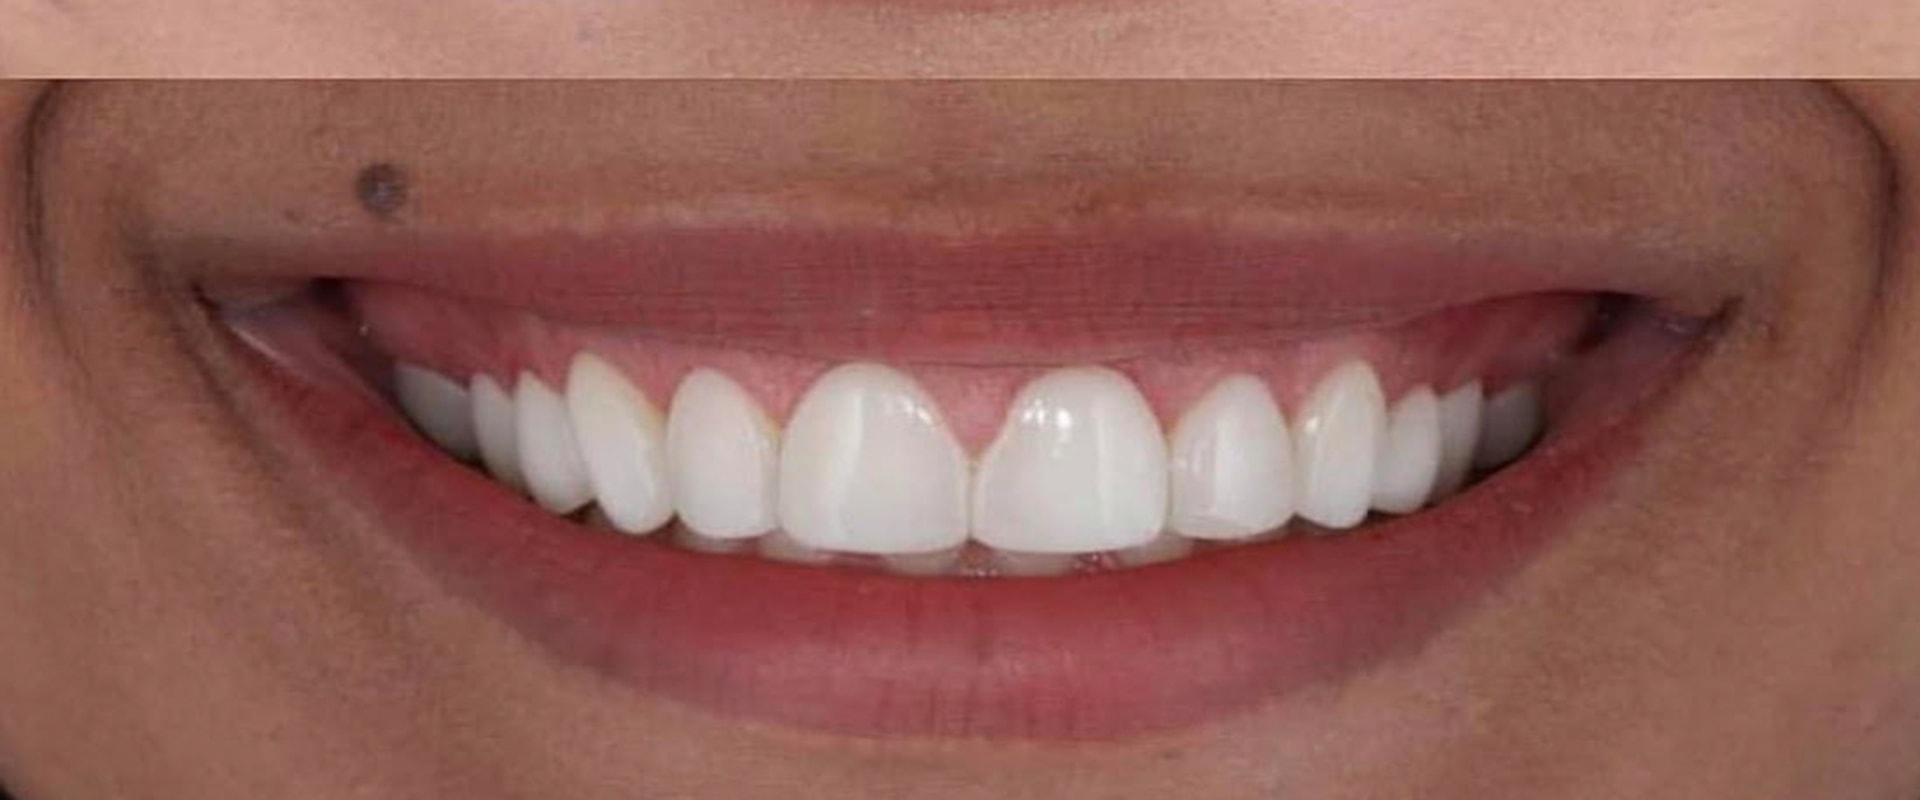 Understanding the Procedure and Recovery for Gum Reshaping